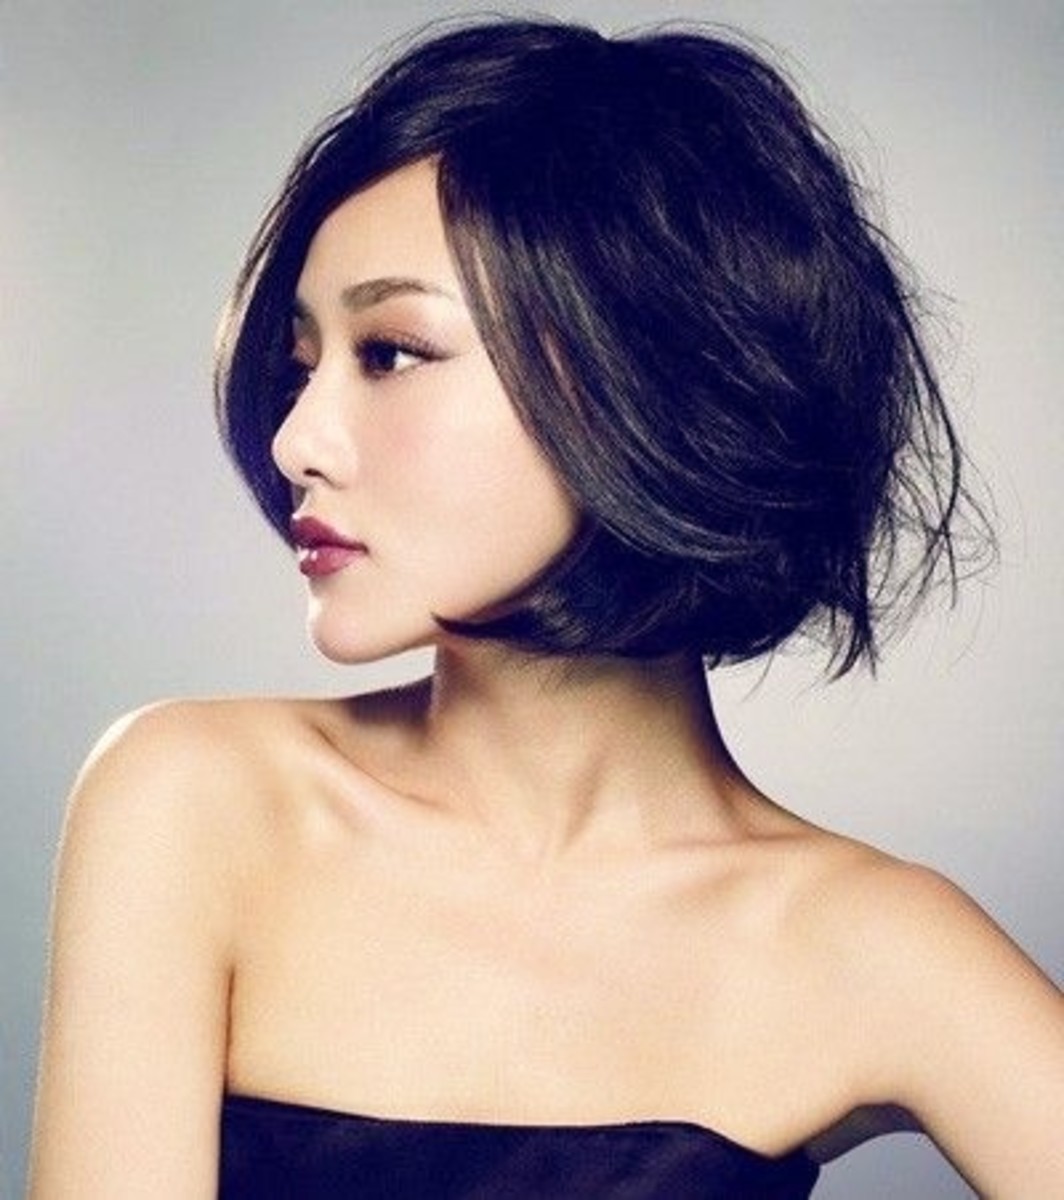 Short and feminine hairstyle for Asian women. A great urban look for living in a big city.